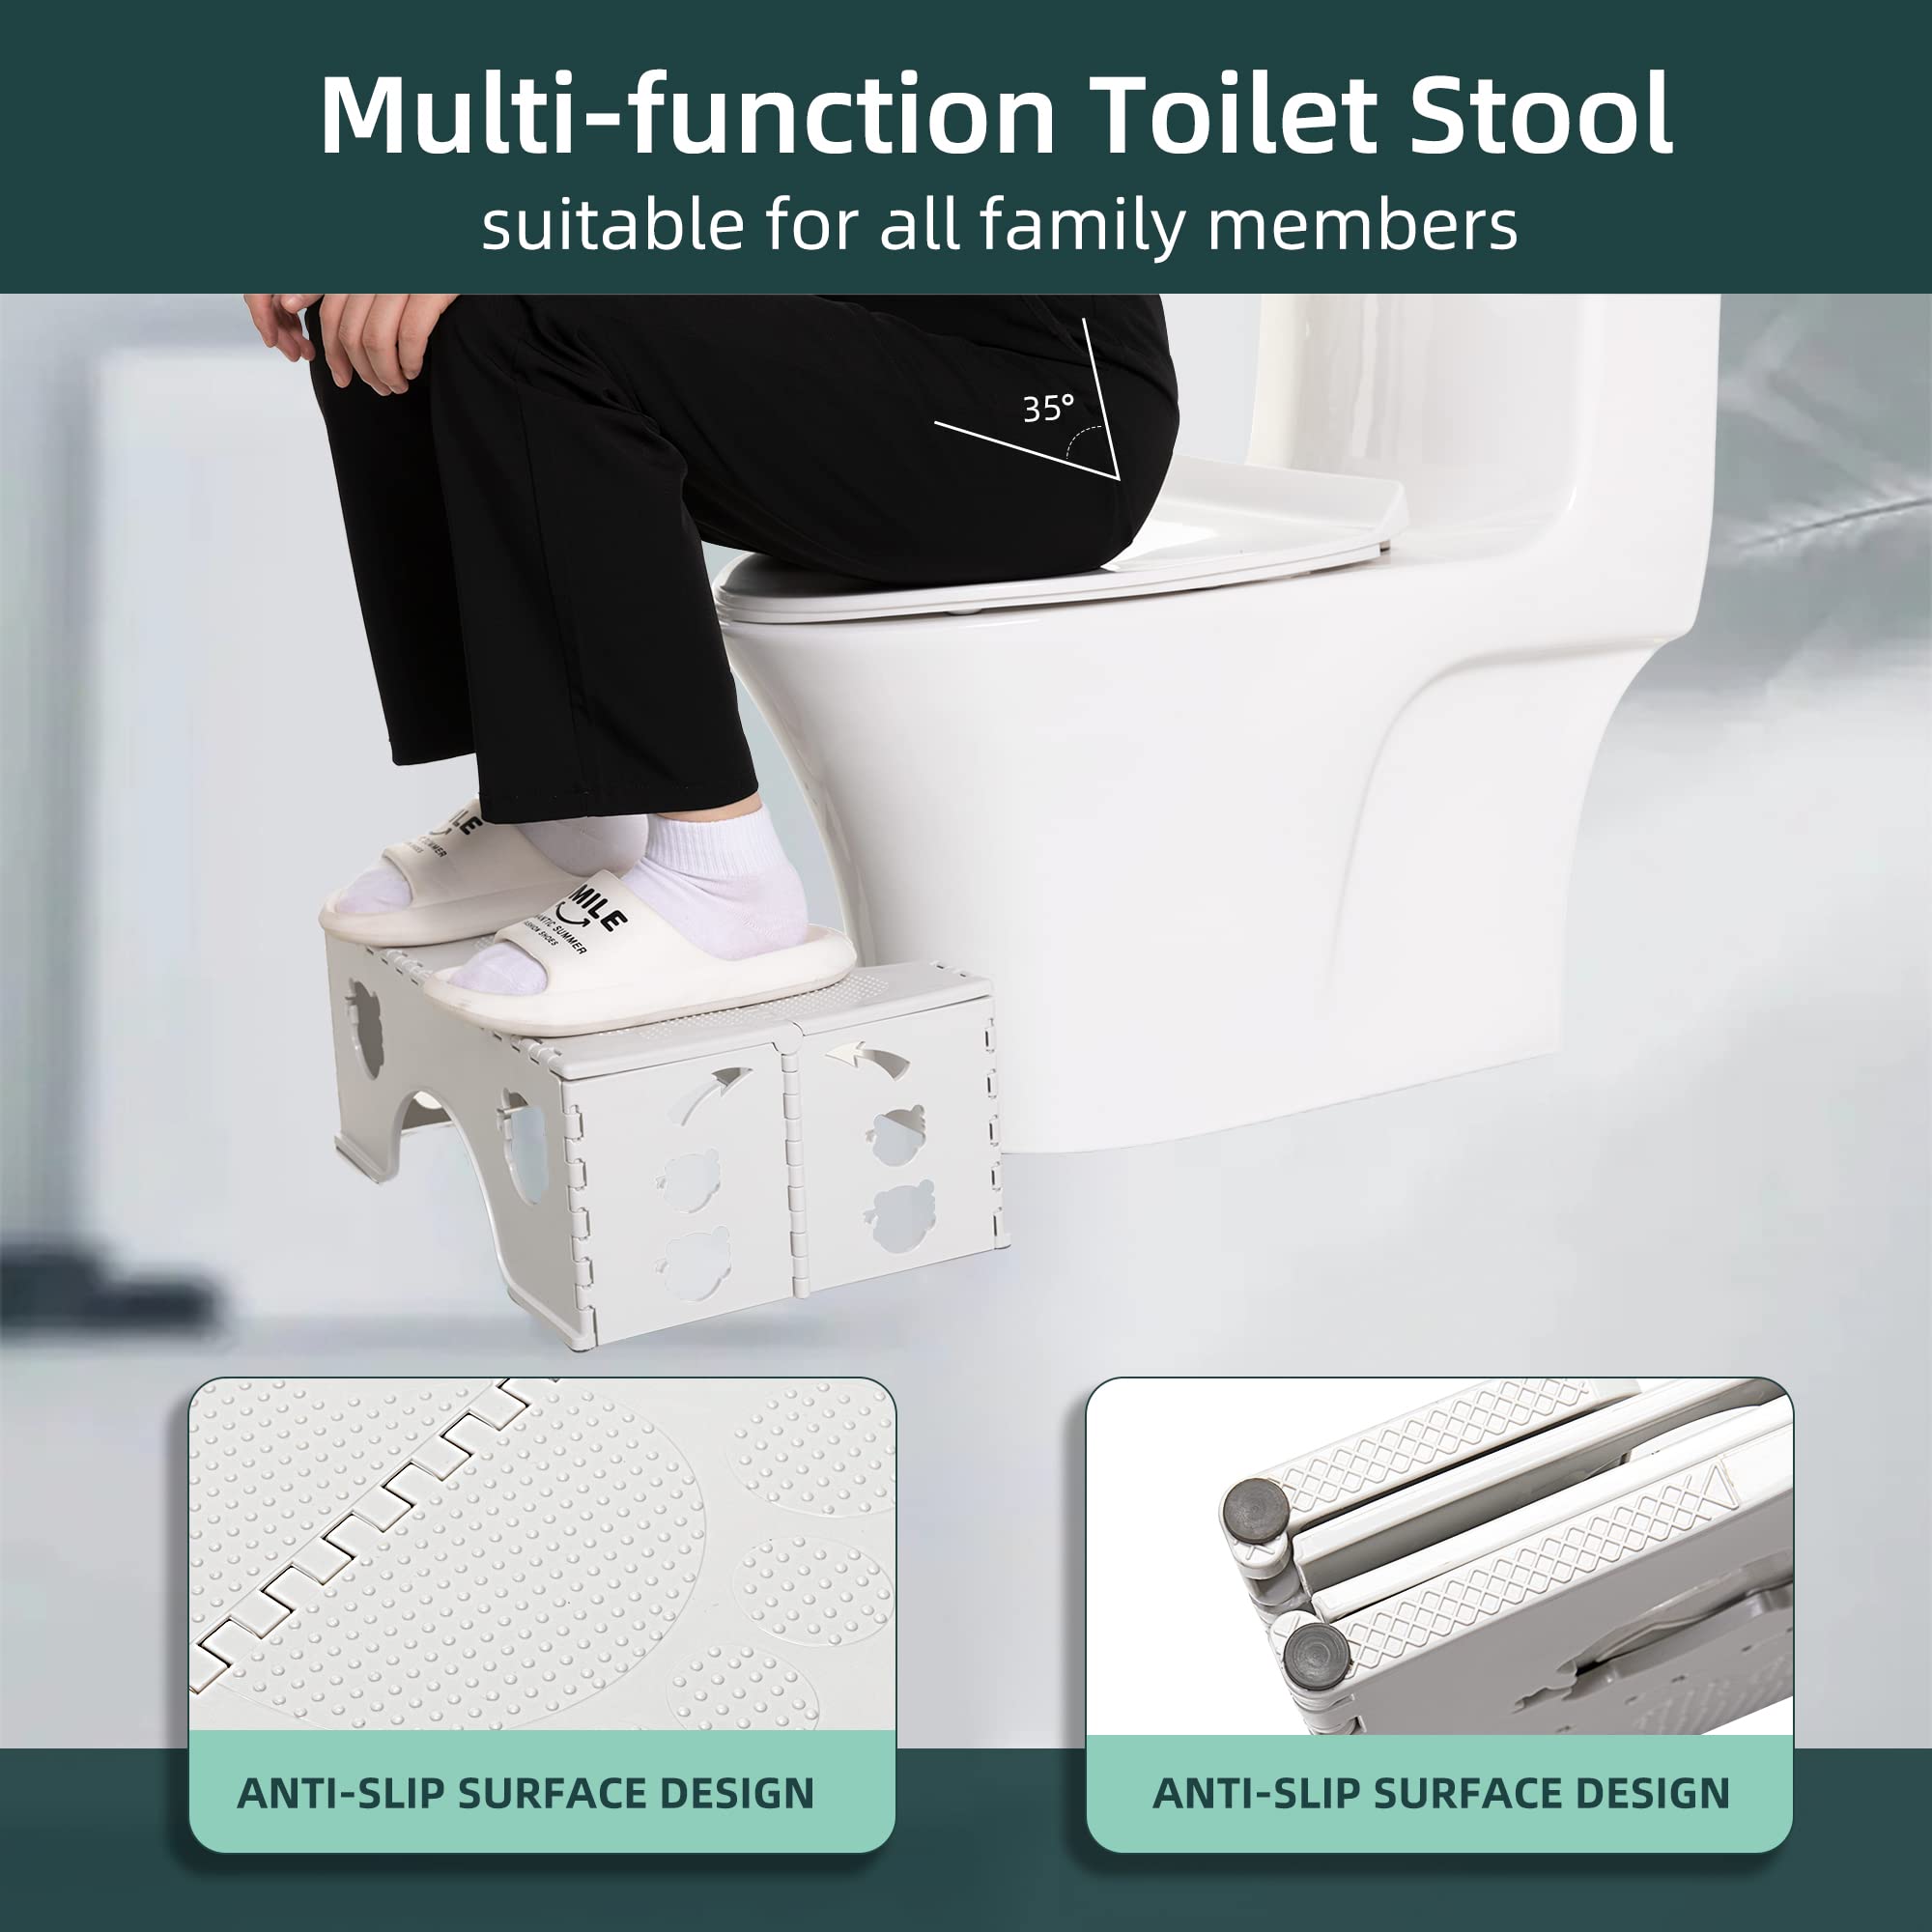 Foldable Toilet Stool, 7inches Healthy Bathroom Squatting Posture Poop Stool with Anti-Slip Feet, A Good Helper to Effective Relief of Constipation, Easy to Storage Toilet Squat Stool.